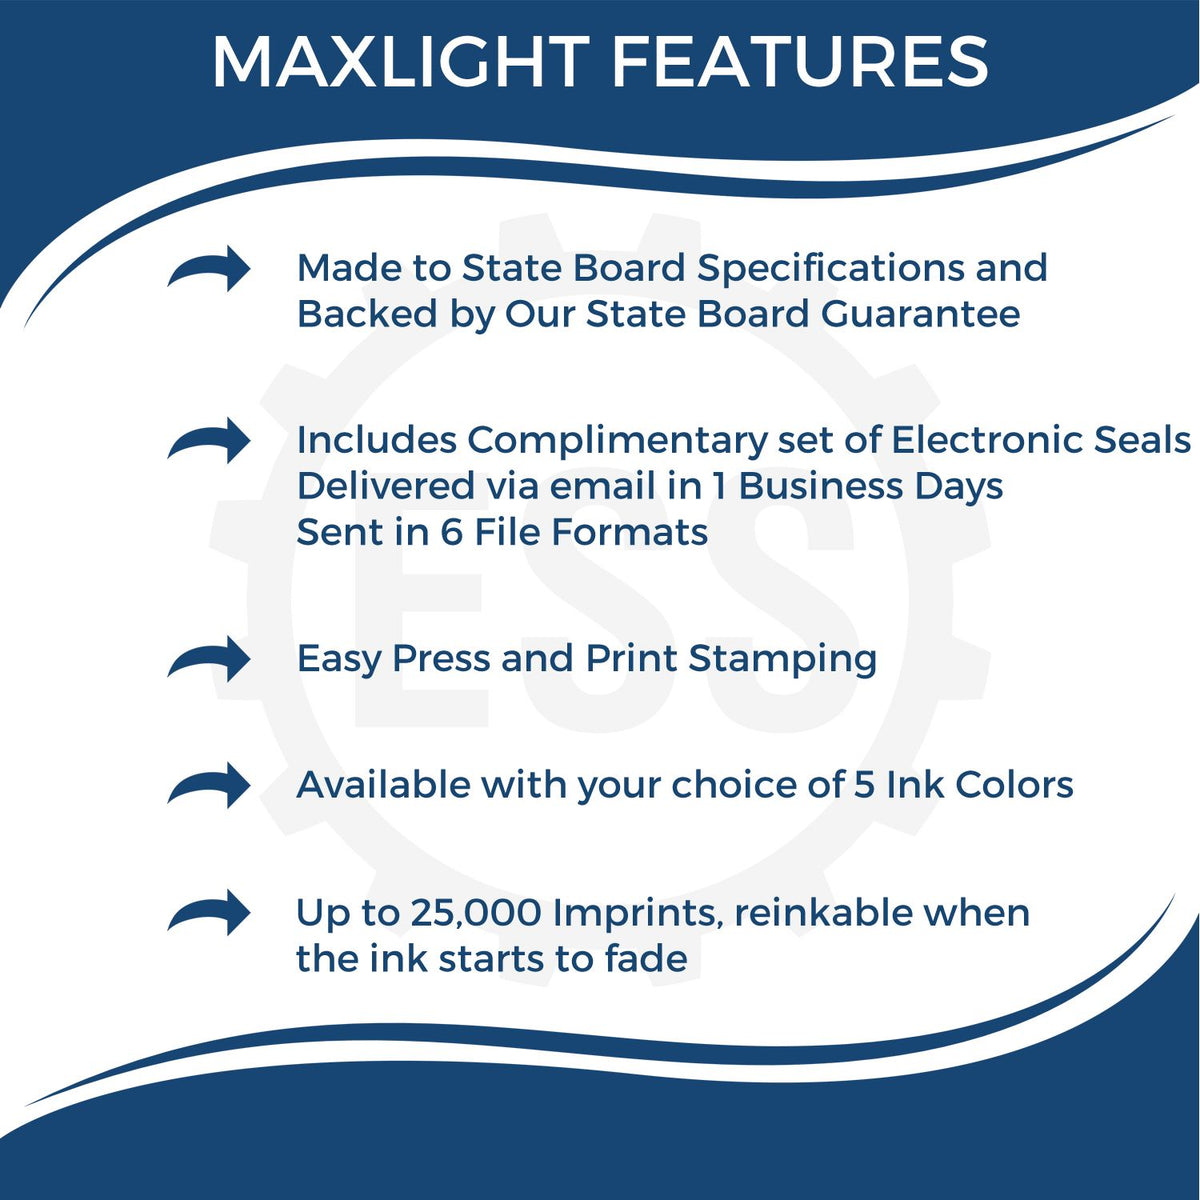 A picture of an infographic highlighting the selling points for the MaxLight Premium Pre-Inked Arizona State Seal Notarial Stamp